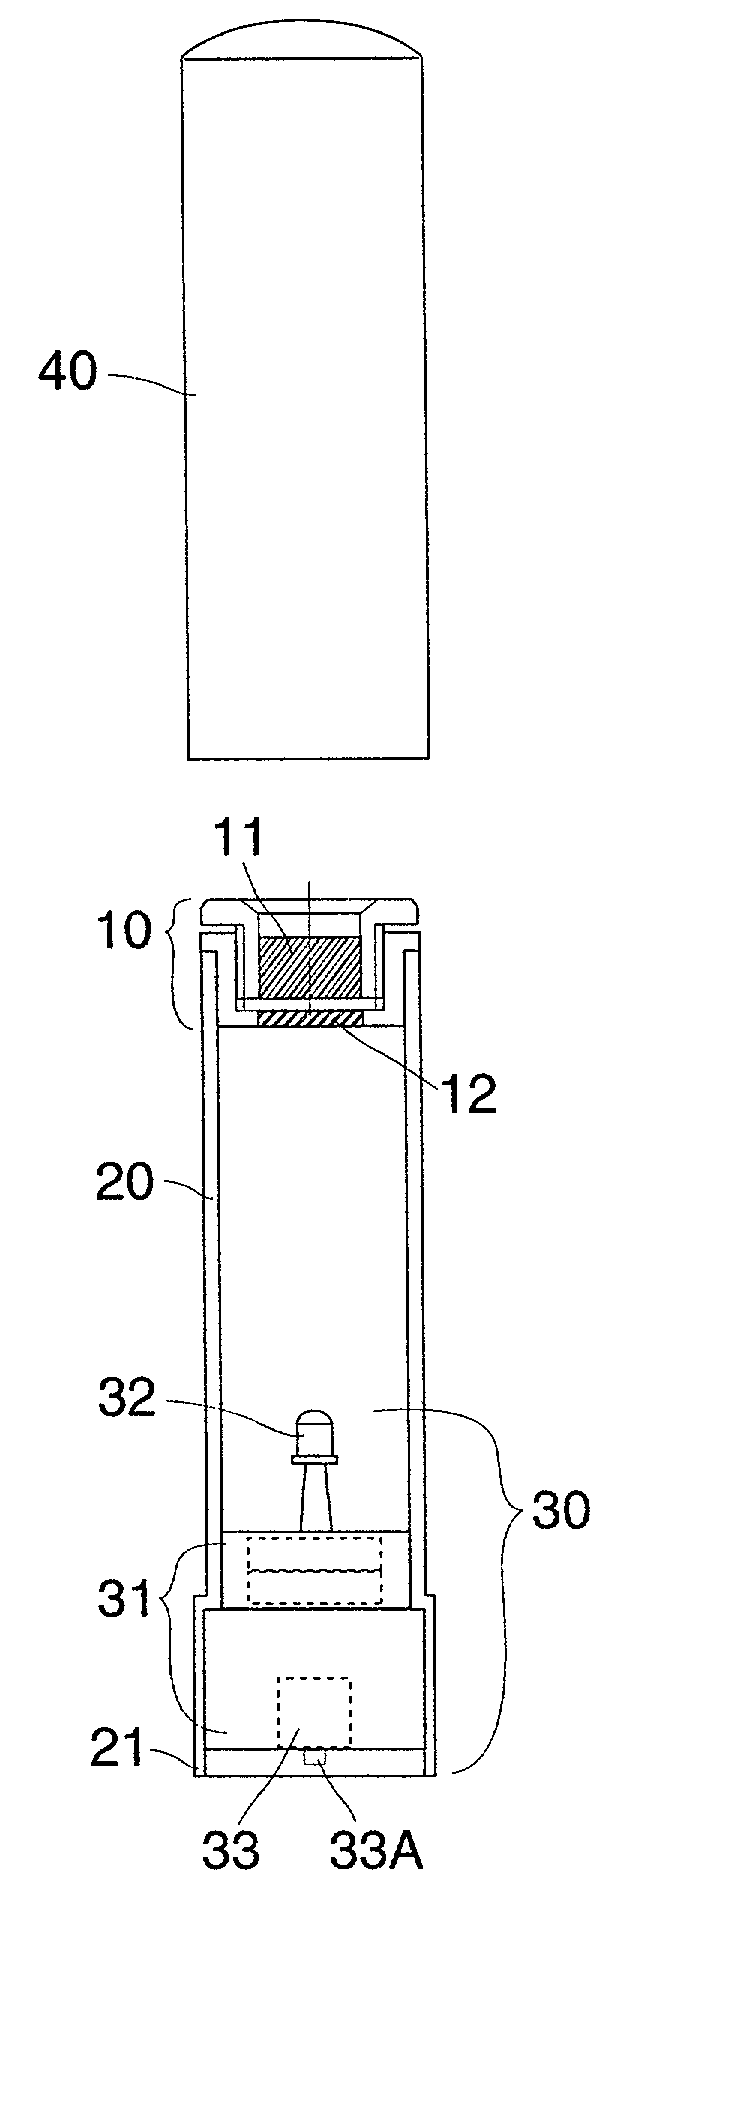 Portable microscopic visualization tube for determining ovulation from saliva assay